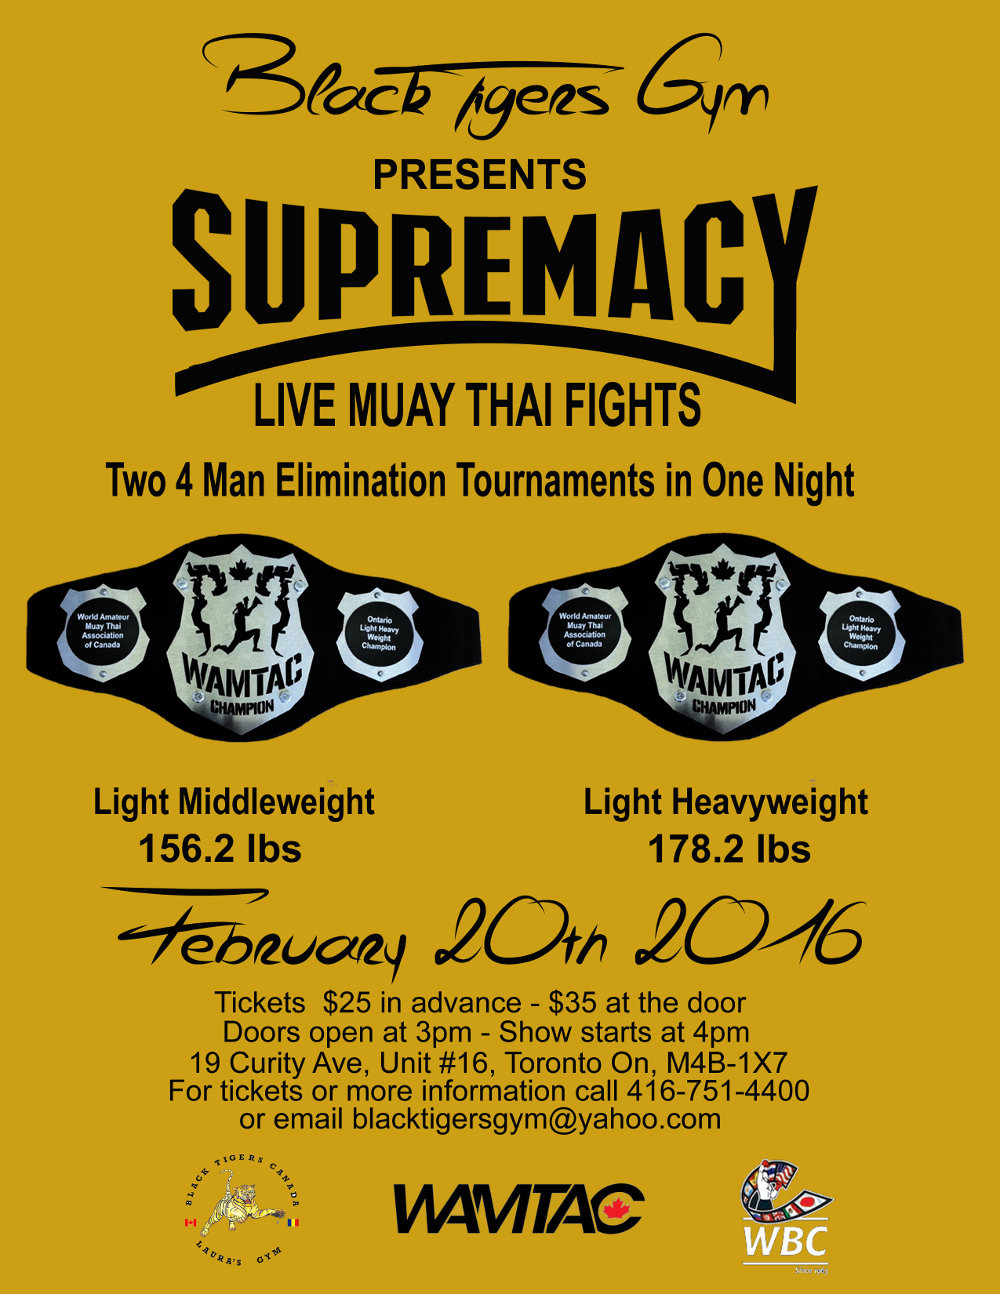 Upcoming Fights